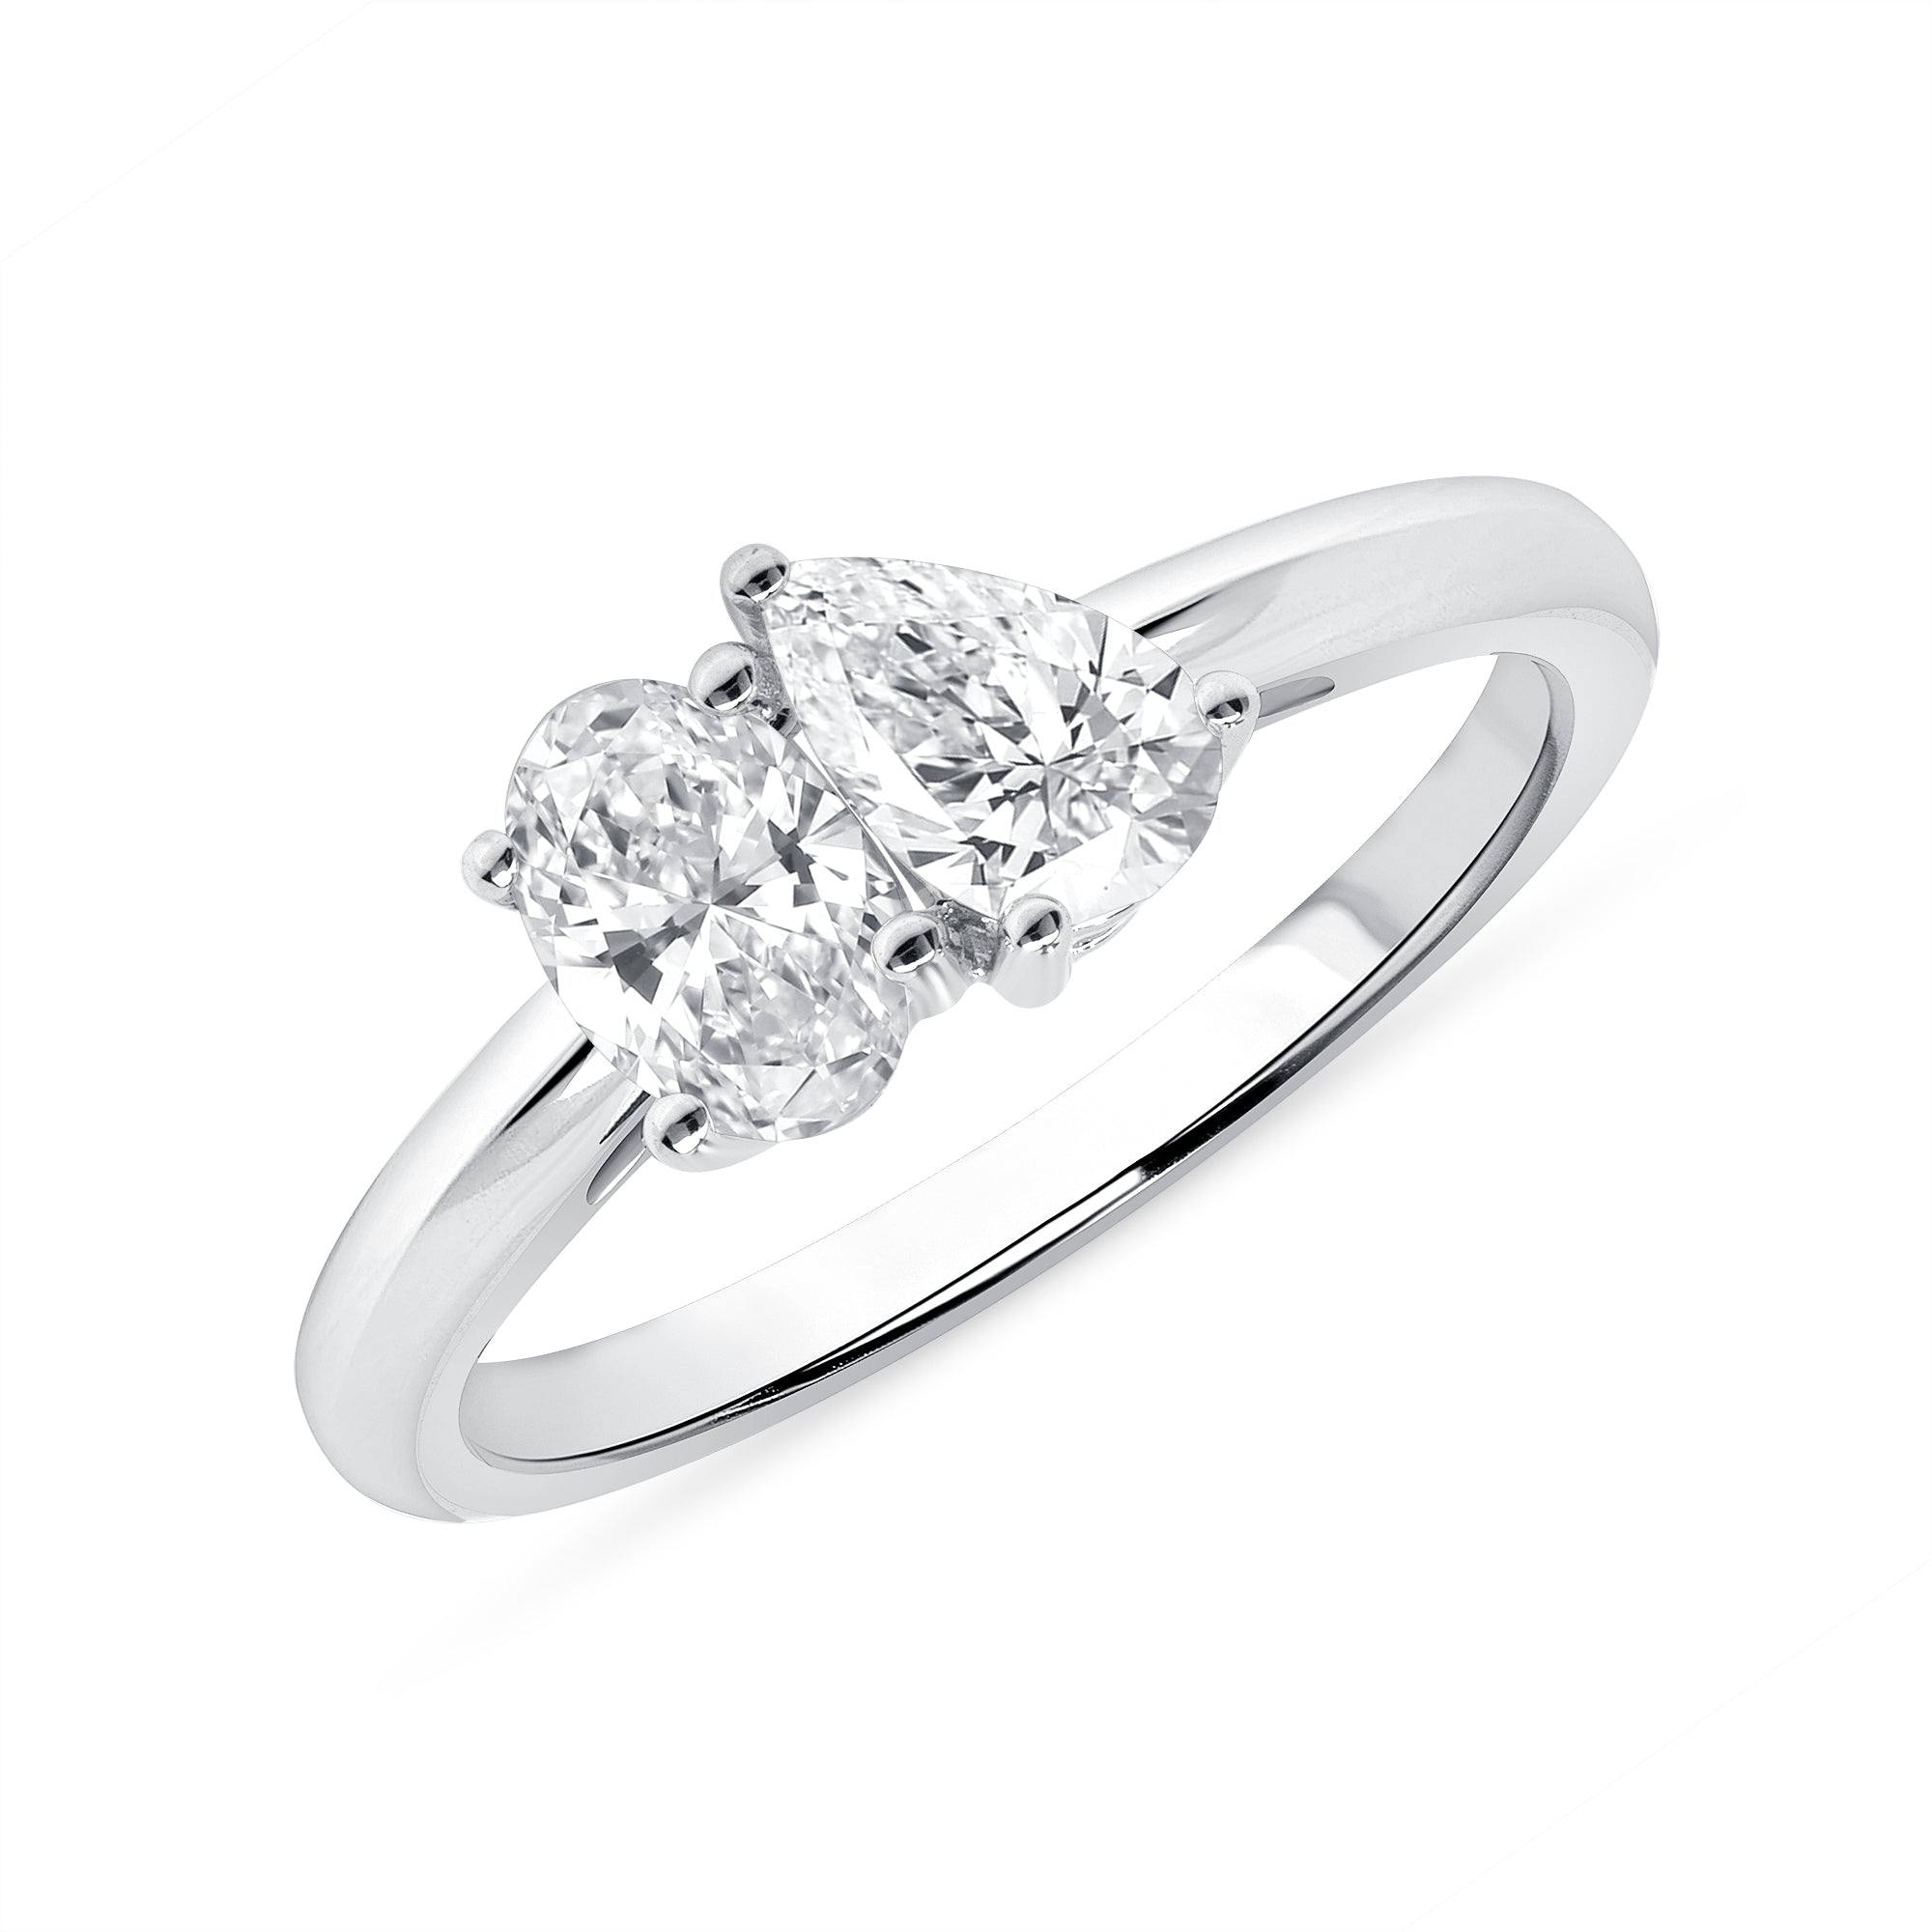 Toi et Moi Oval and Pear Diamond Engagement Ring in White Gold